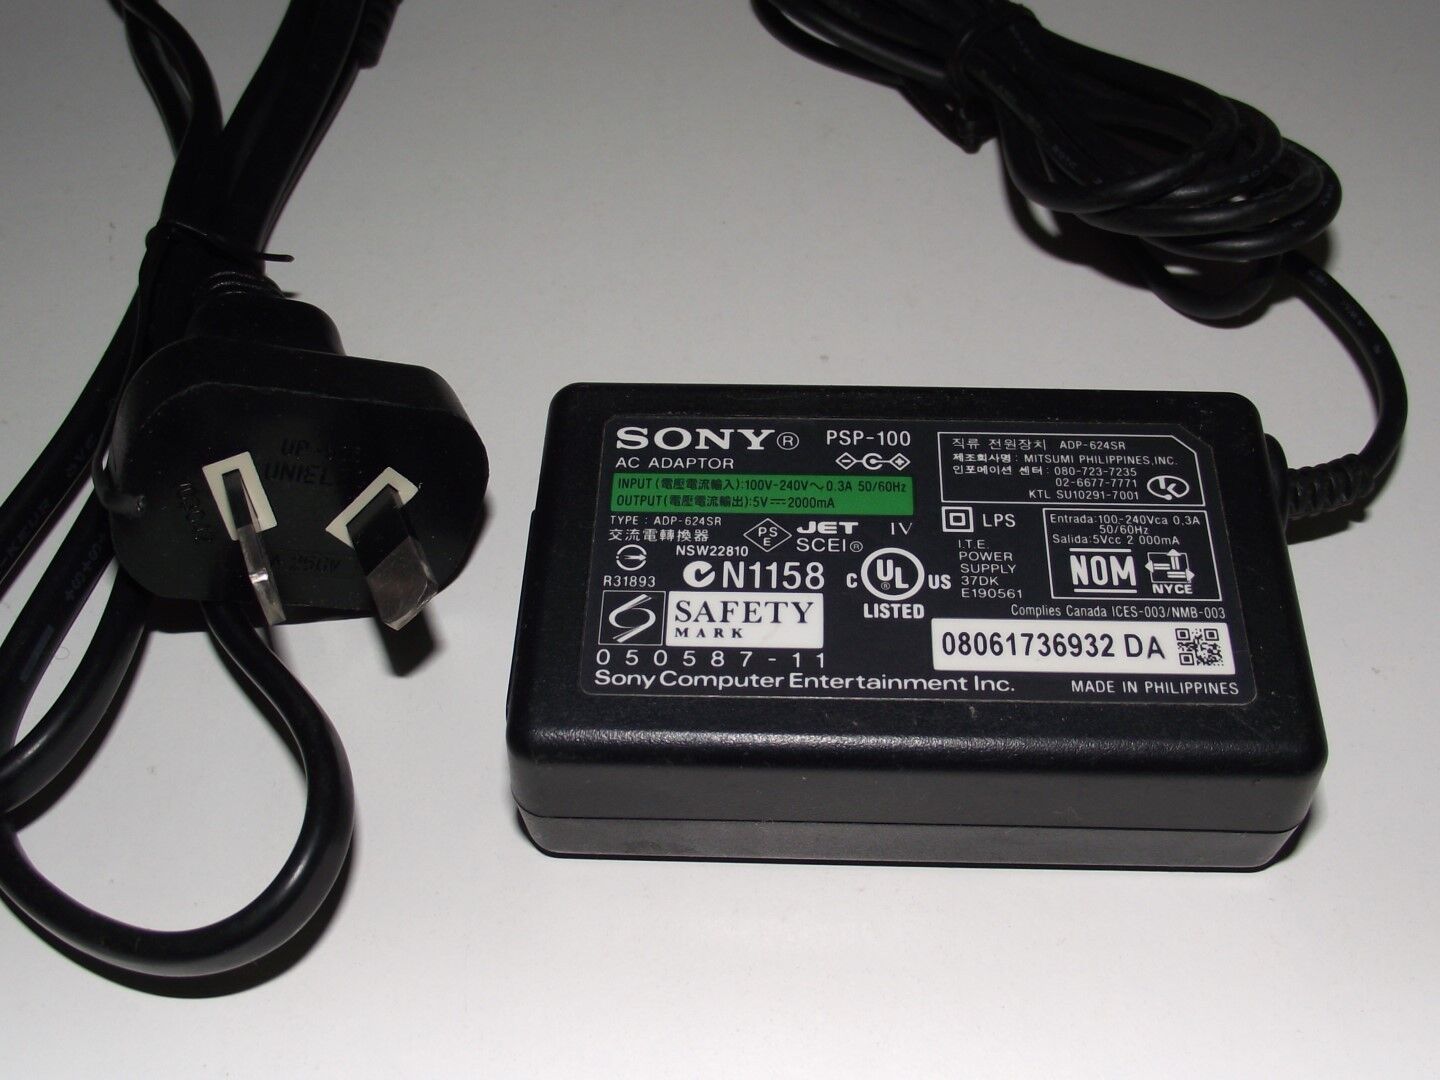 *Brand NEW*Genuine Playstation PSP 1000 Portable Wall Charger 2000mA Power Adapter Cord